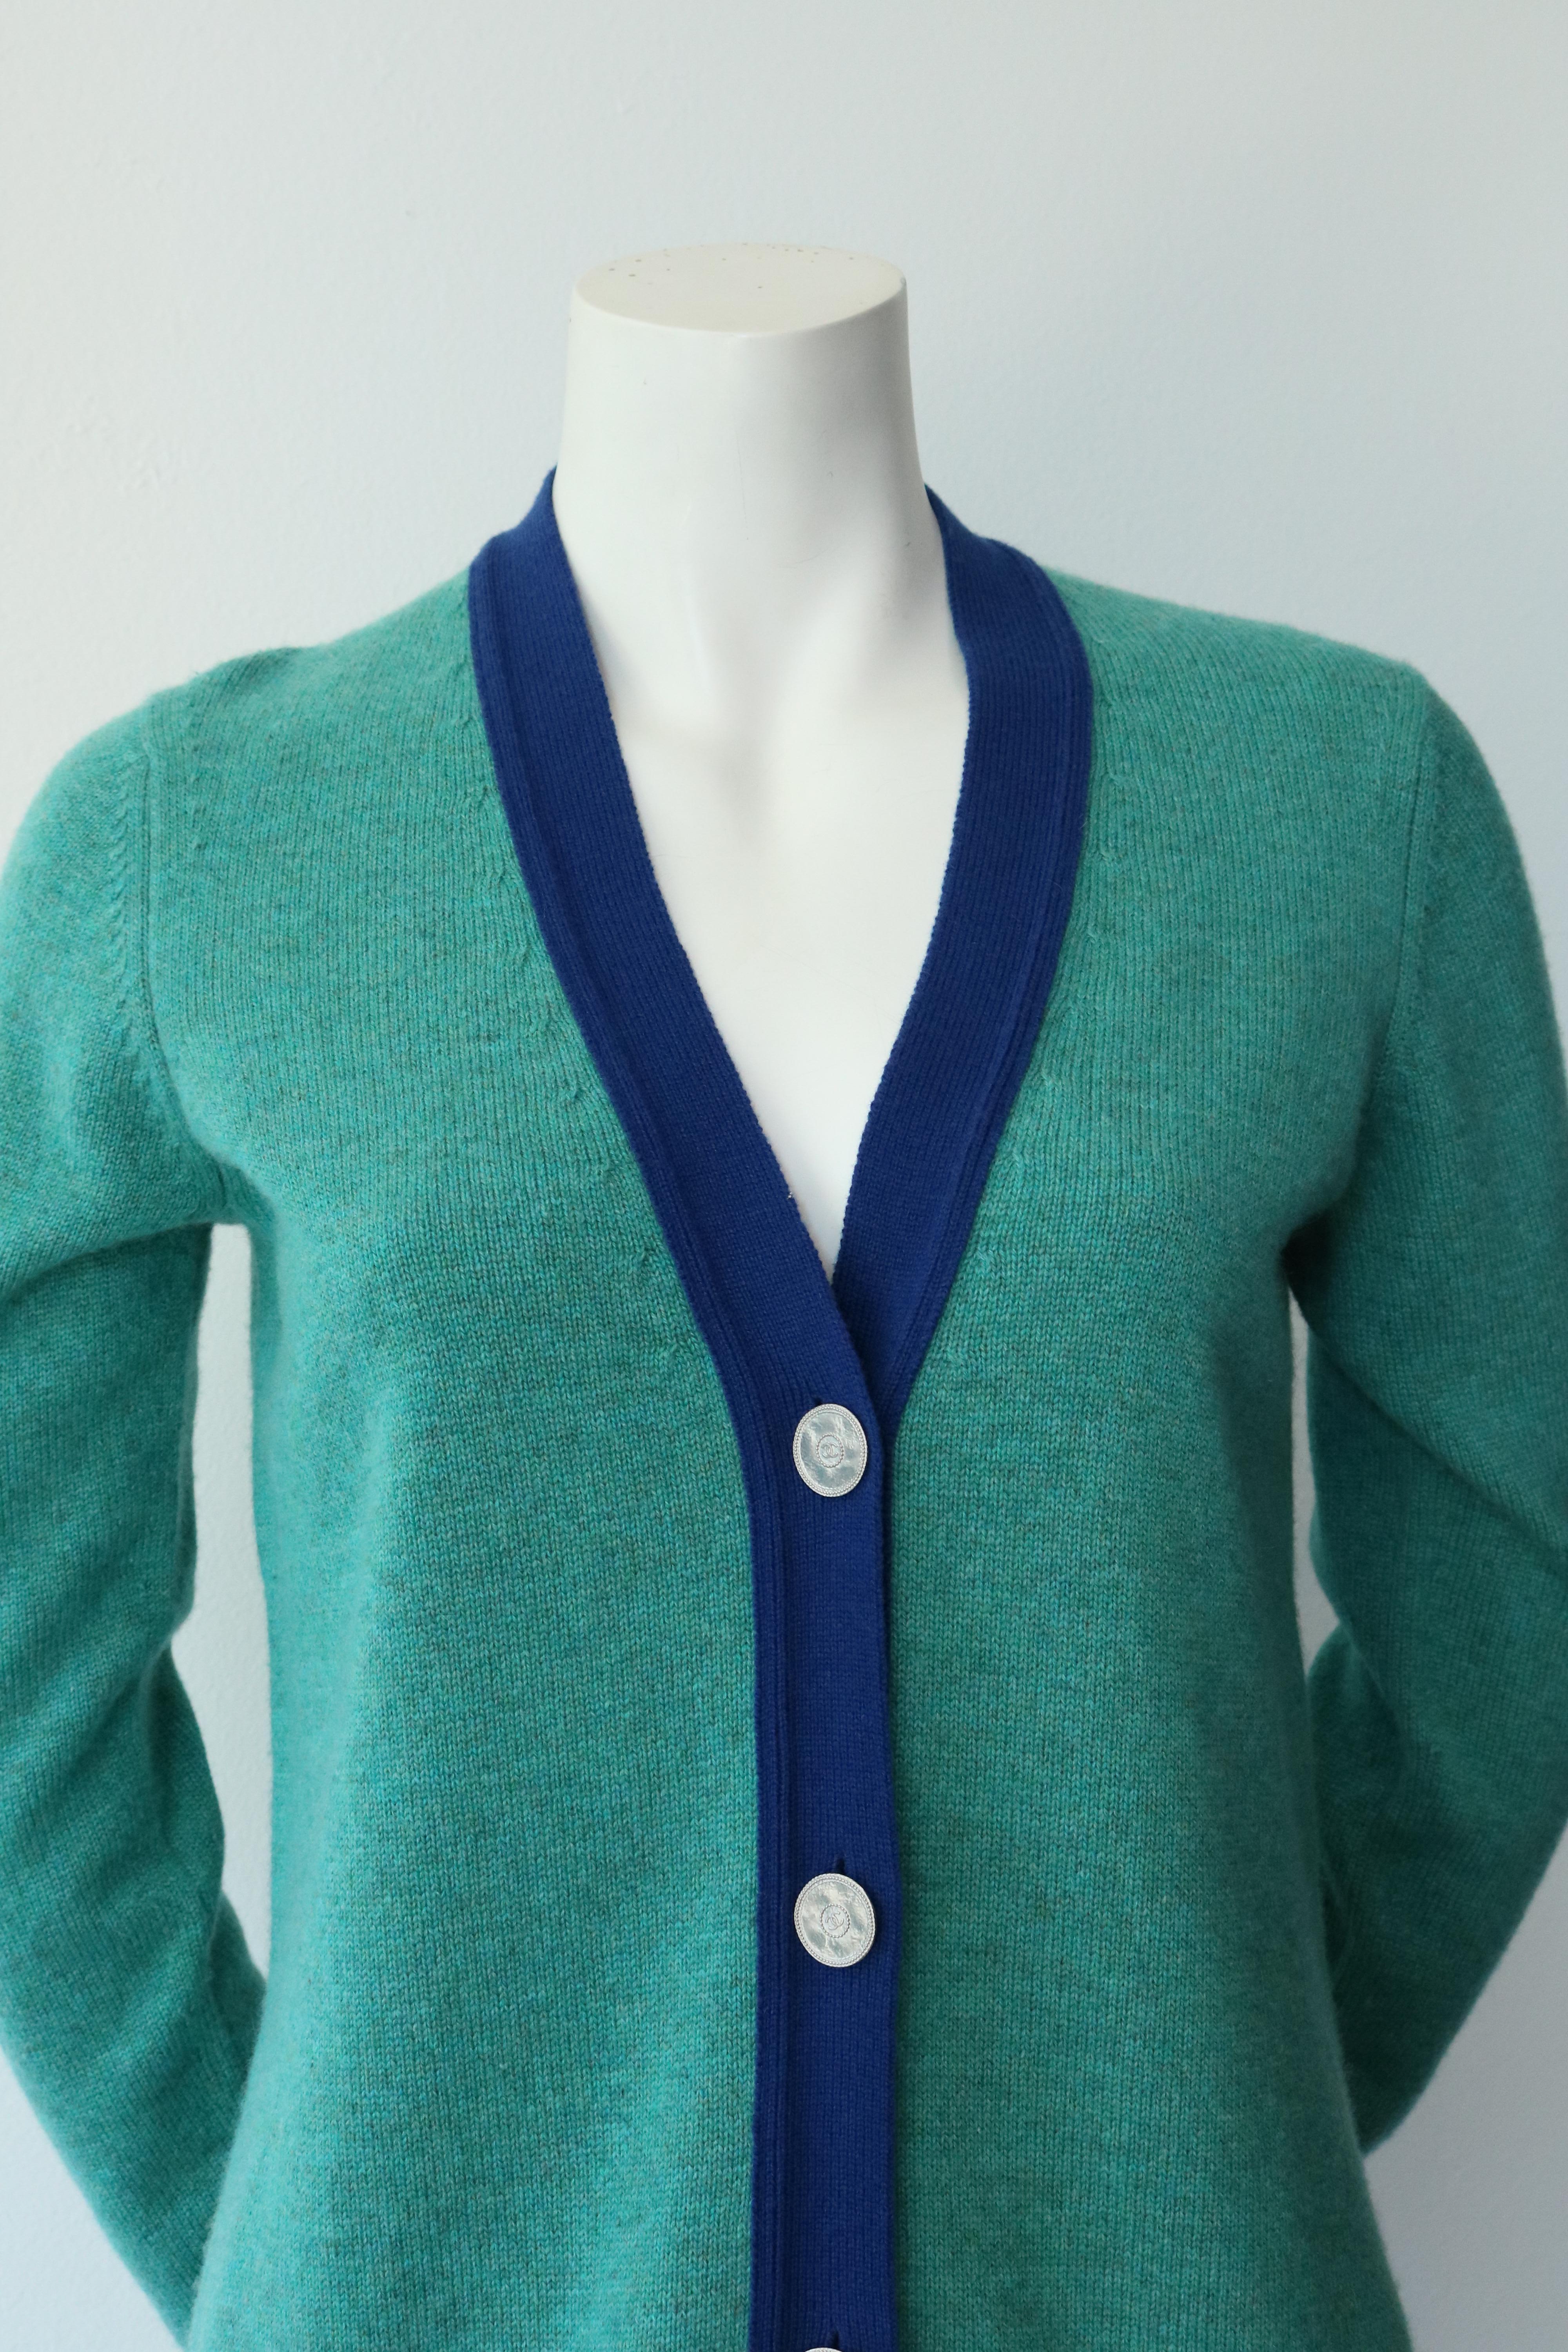 Blue and Green Chanel Cadigan 
-Mint Condition
-Size 36 
-100% Cashmere
